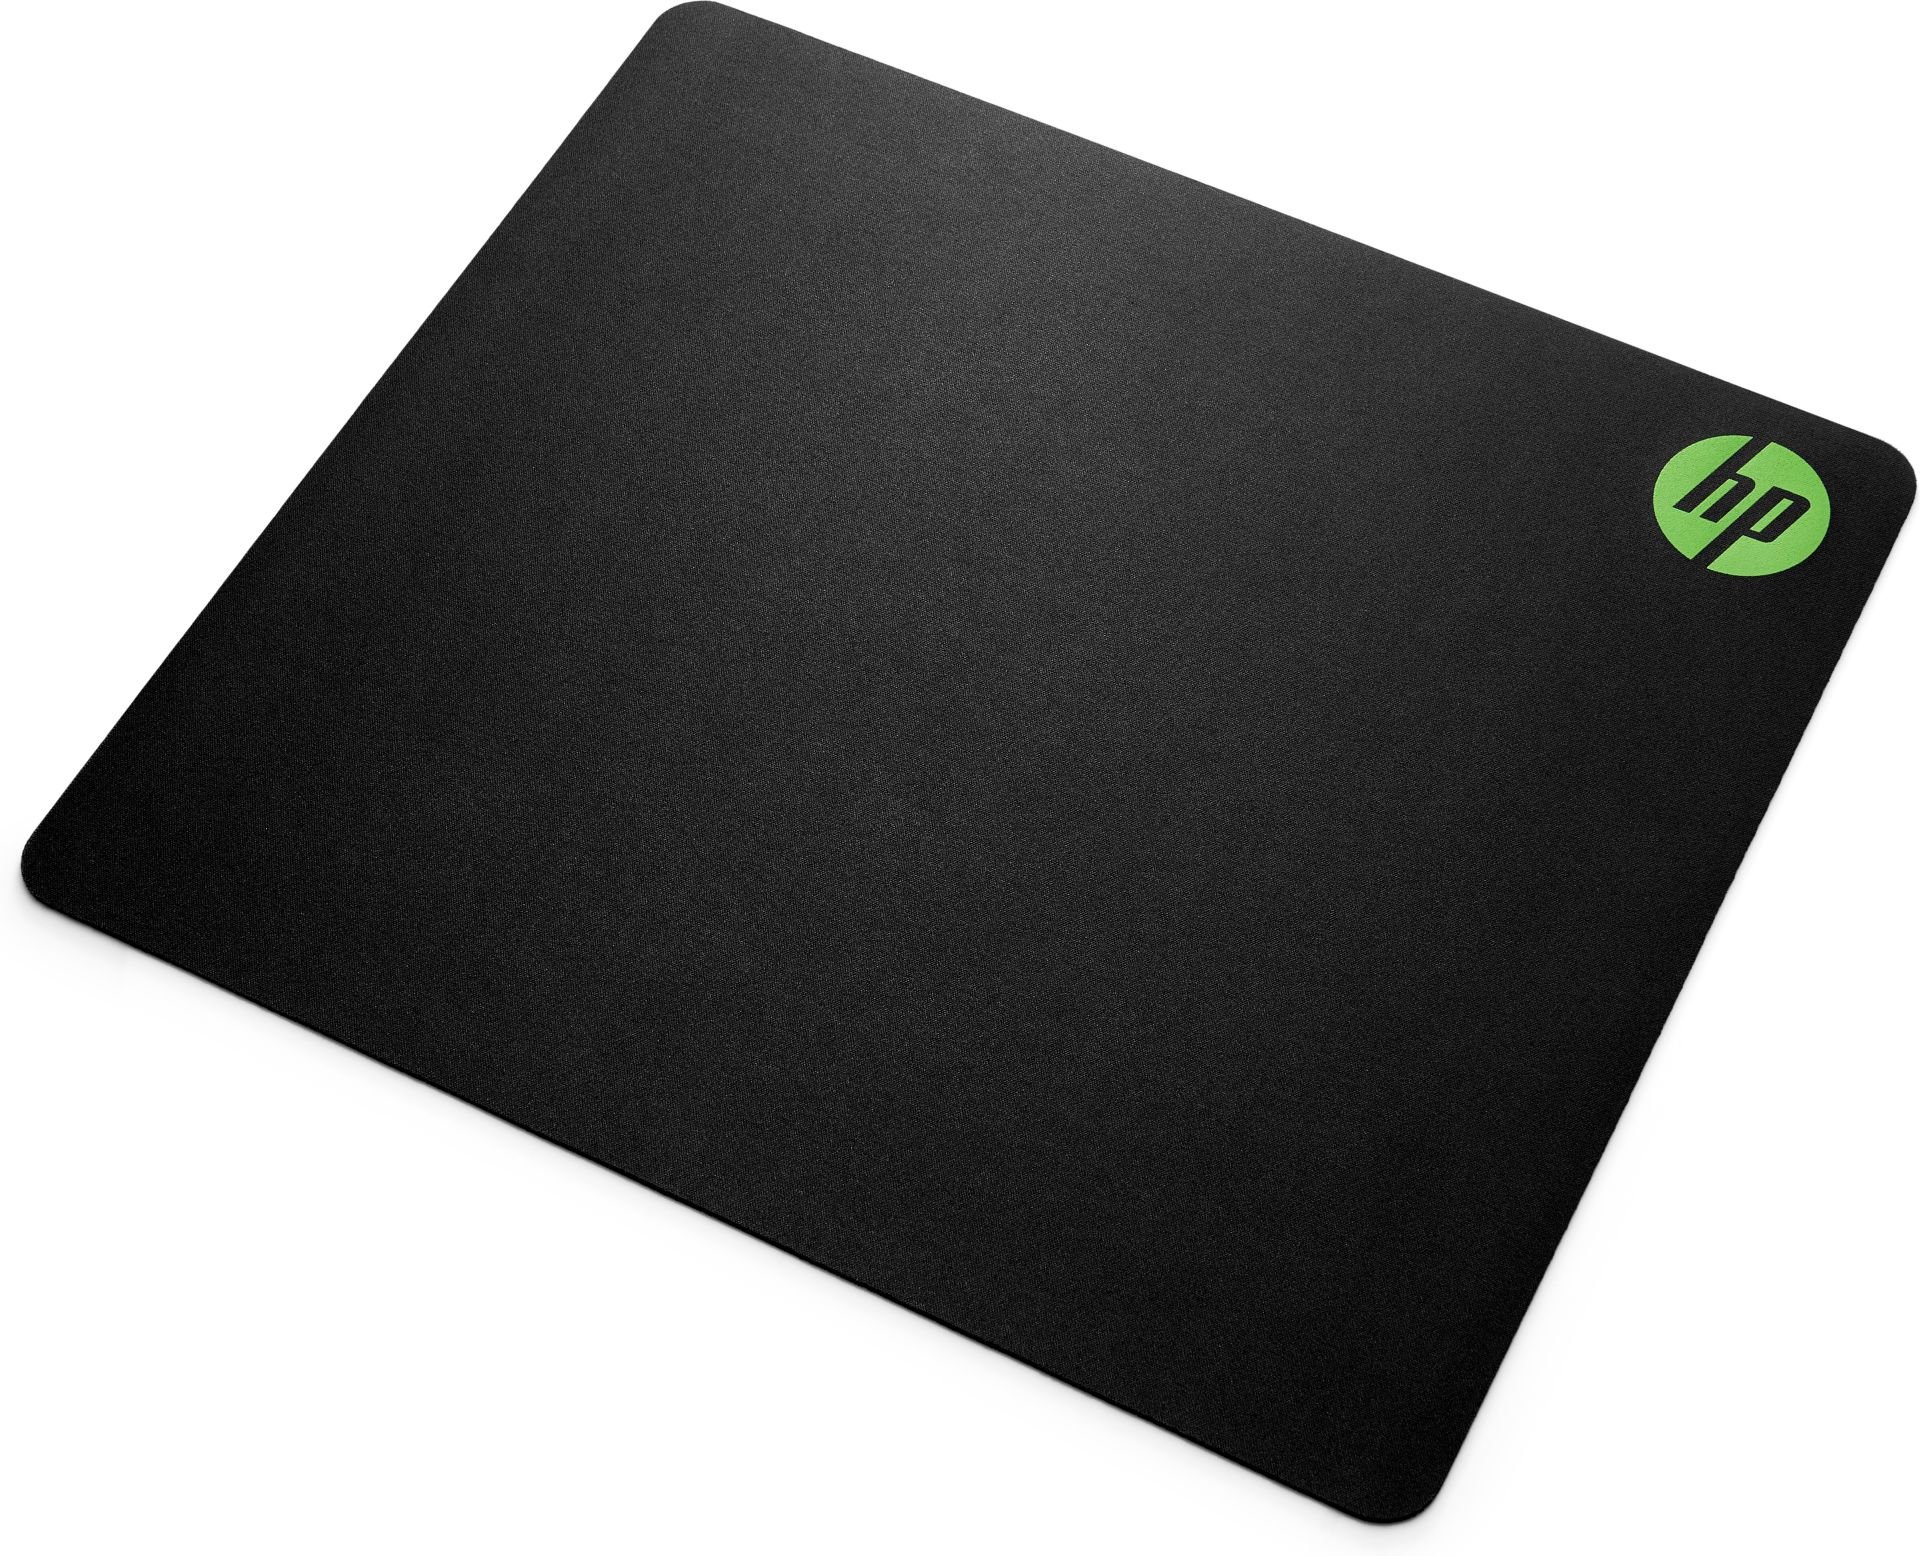 HP Pavilion 300 Gaming Mouse Pad 4PZ84AA